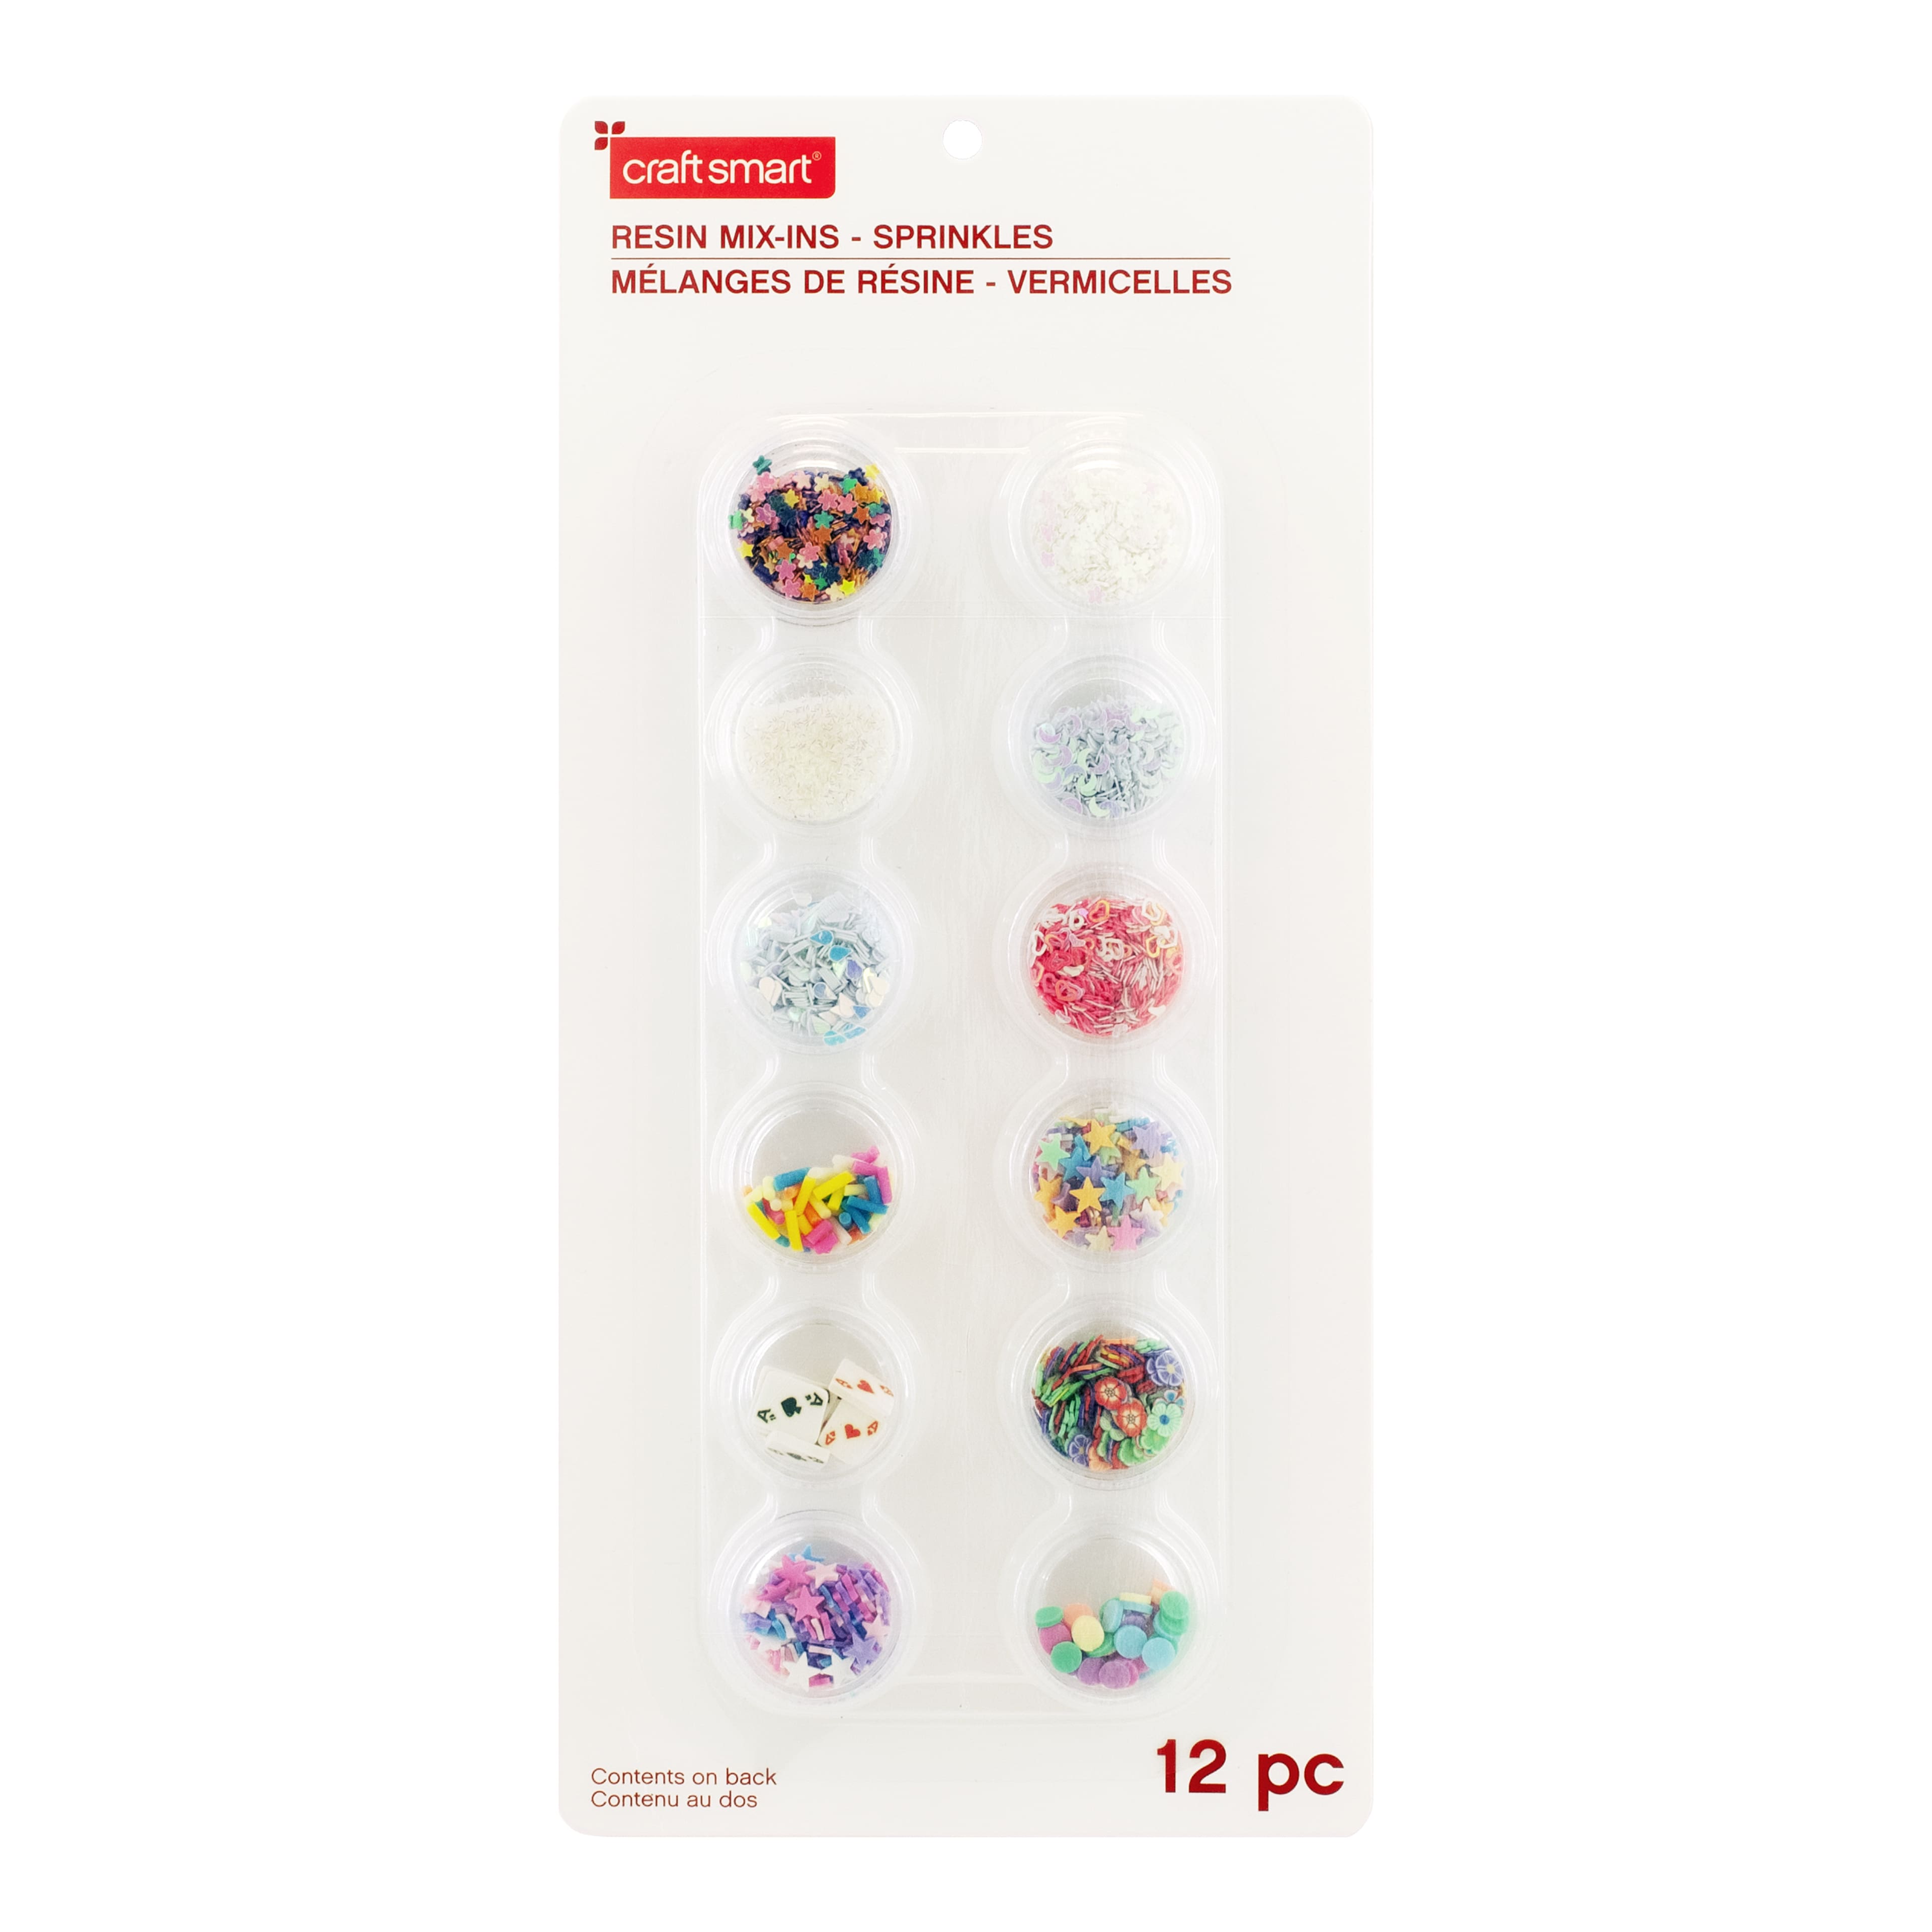 Sprinkles Resin Mix-Ins by Craft Smart&#xAE;, 12 ct.